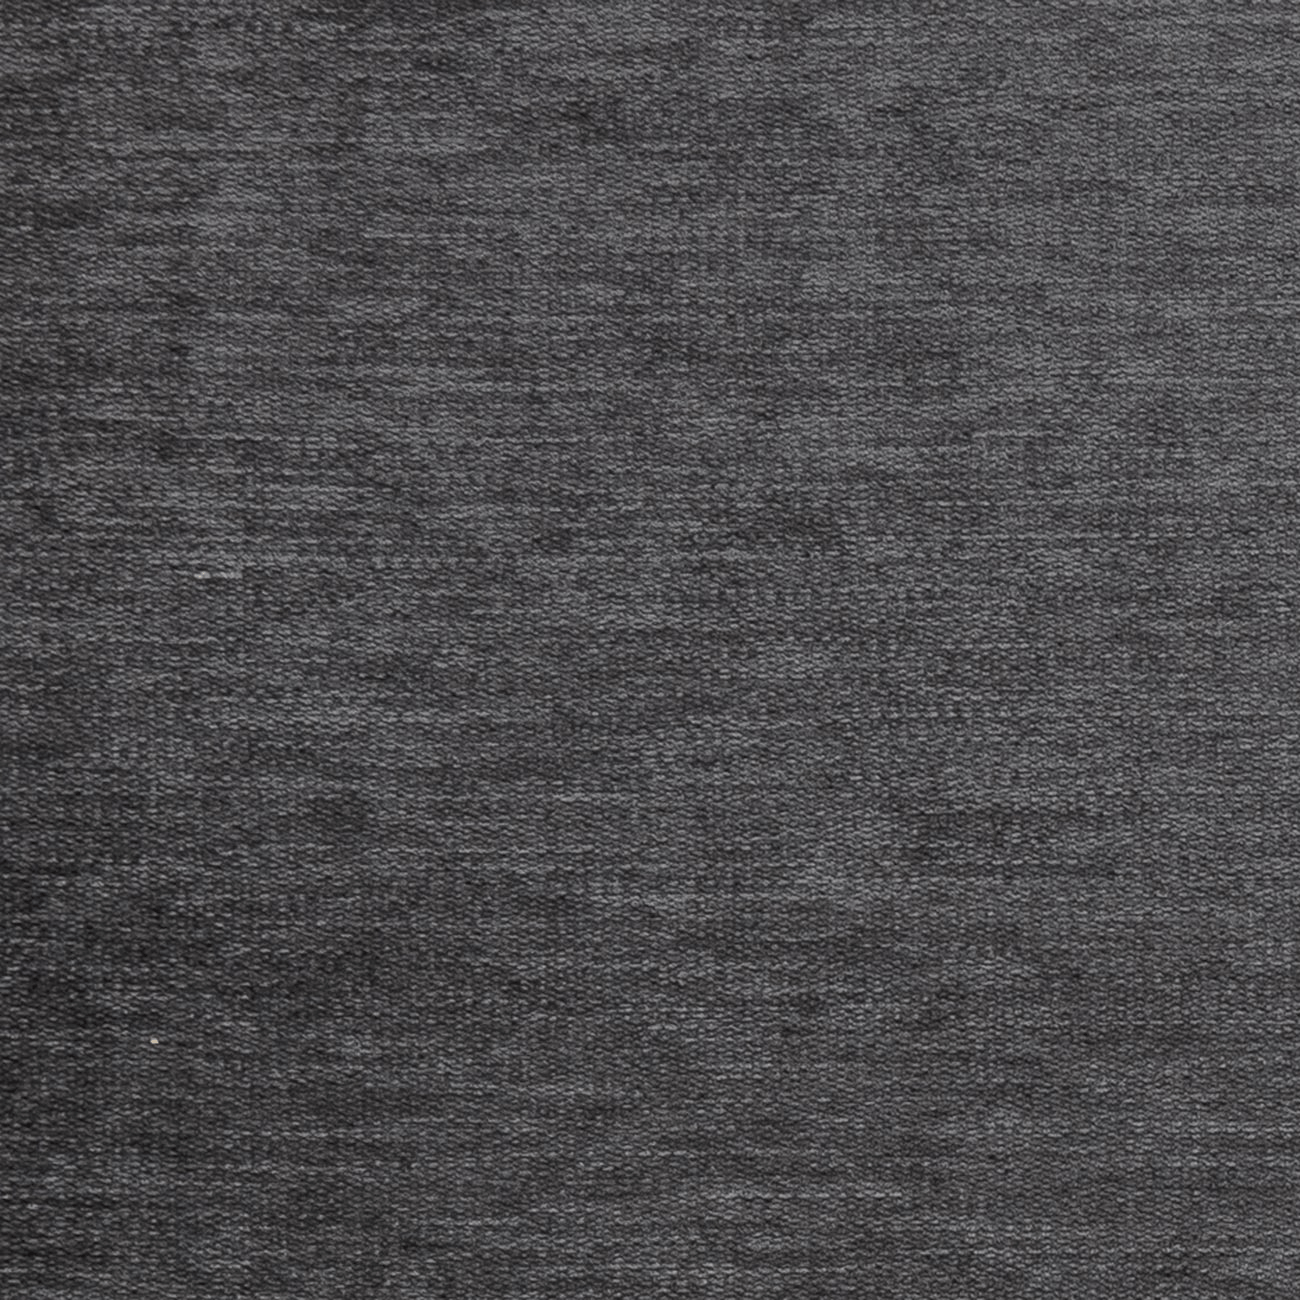 Brina Fabric - Charcoal - By Clarke and Clarke - F0435/04